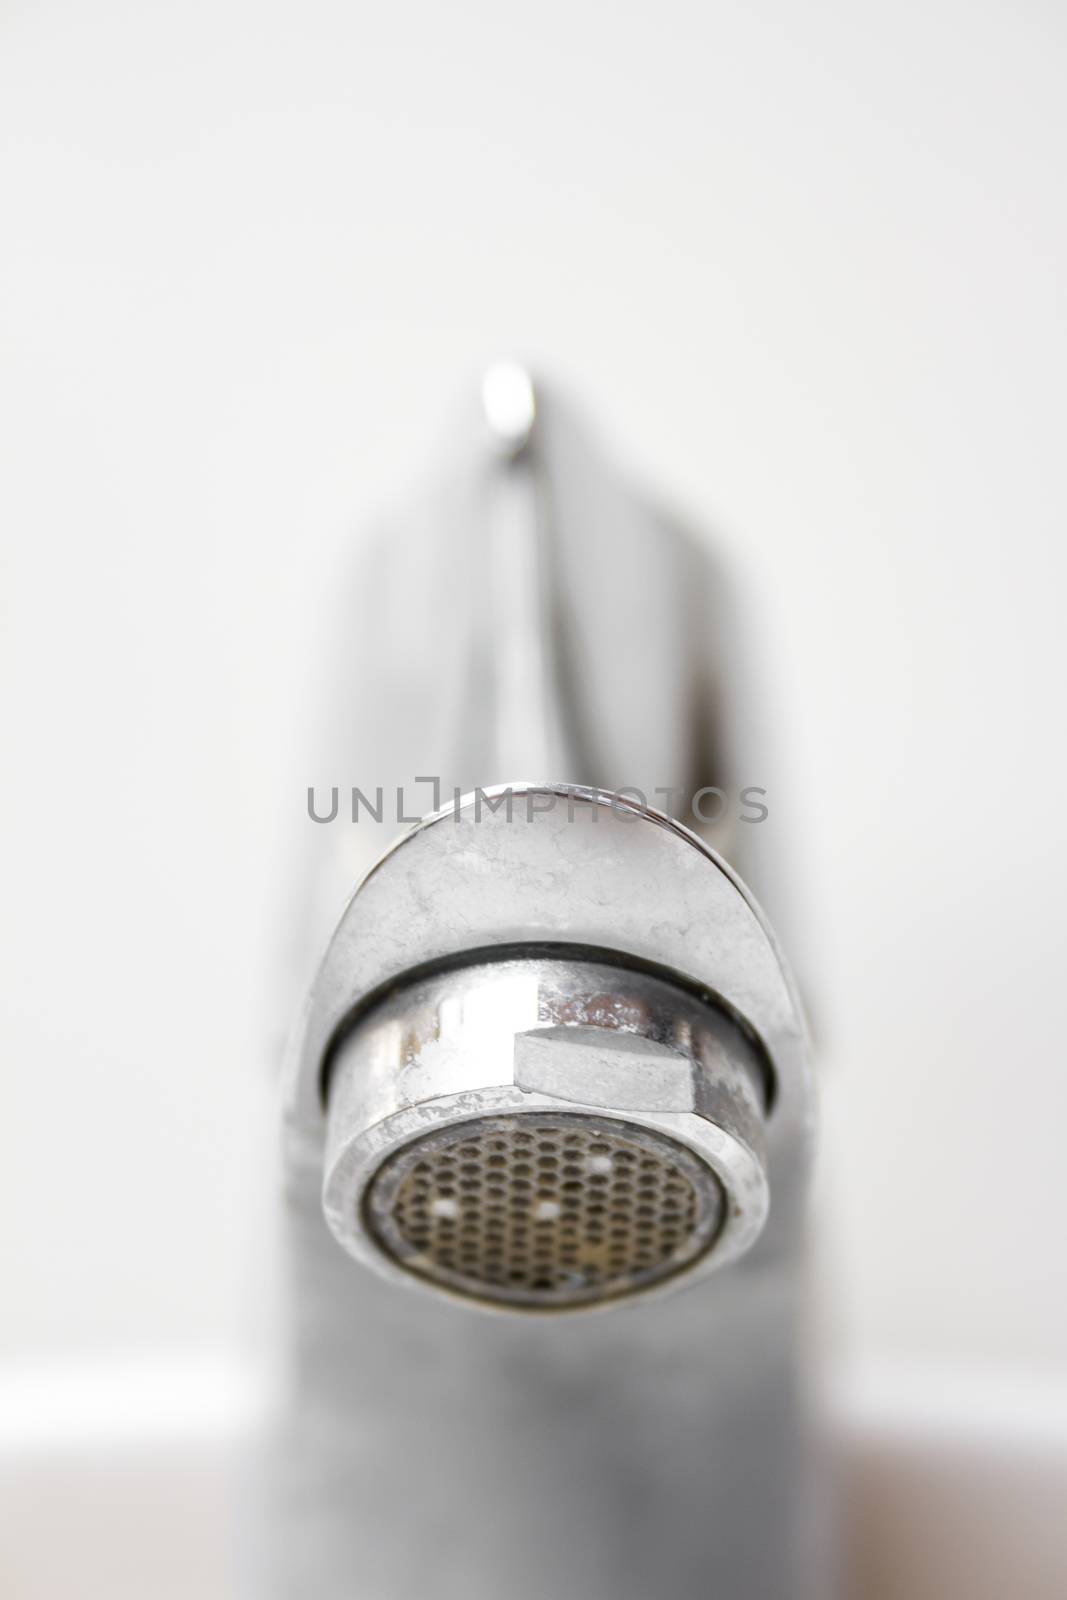 Front view of modern style dirty faucet closeup view on white tiles background with small depth of field